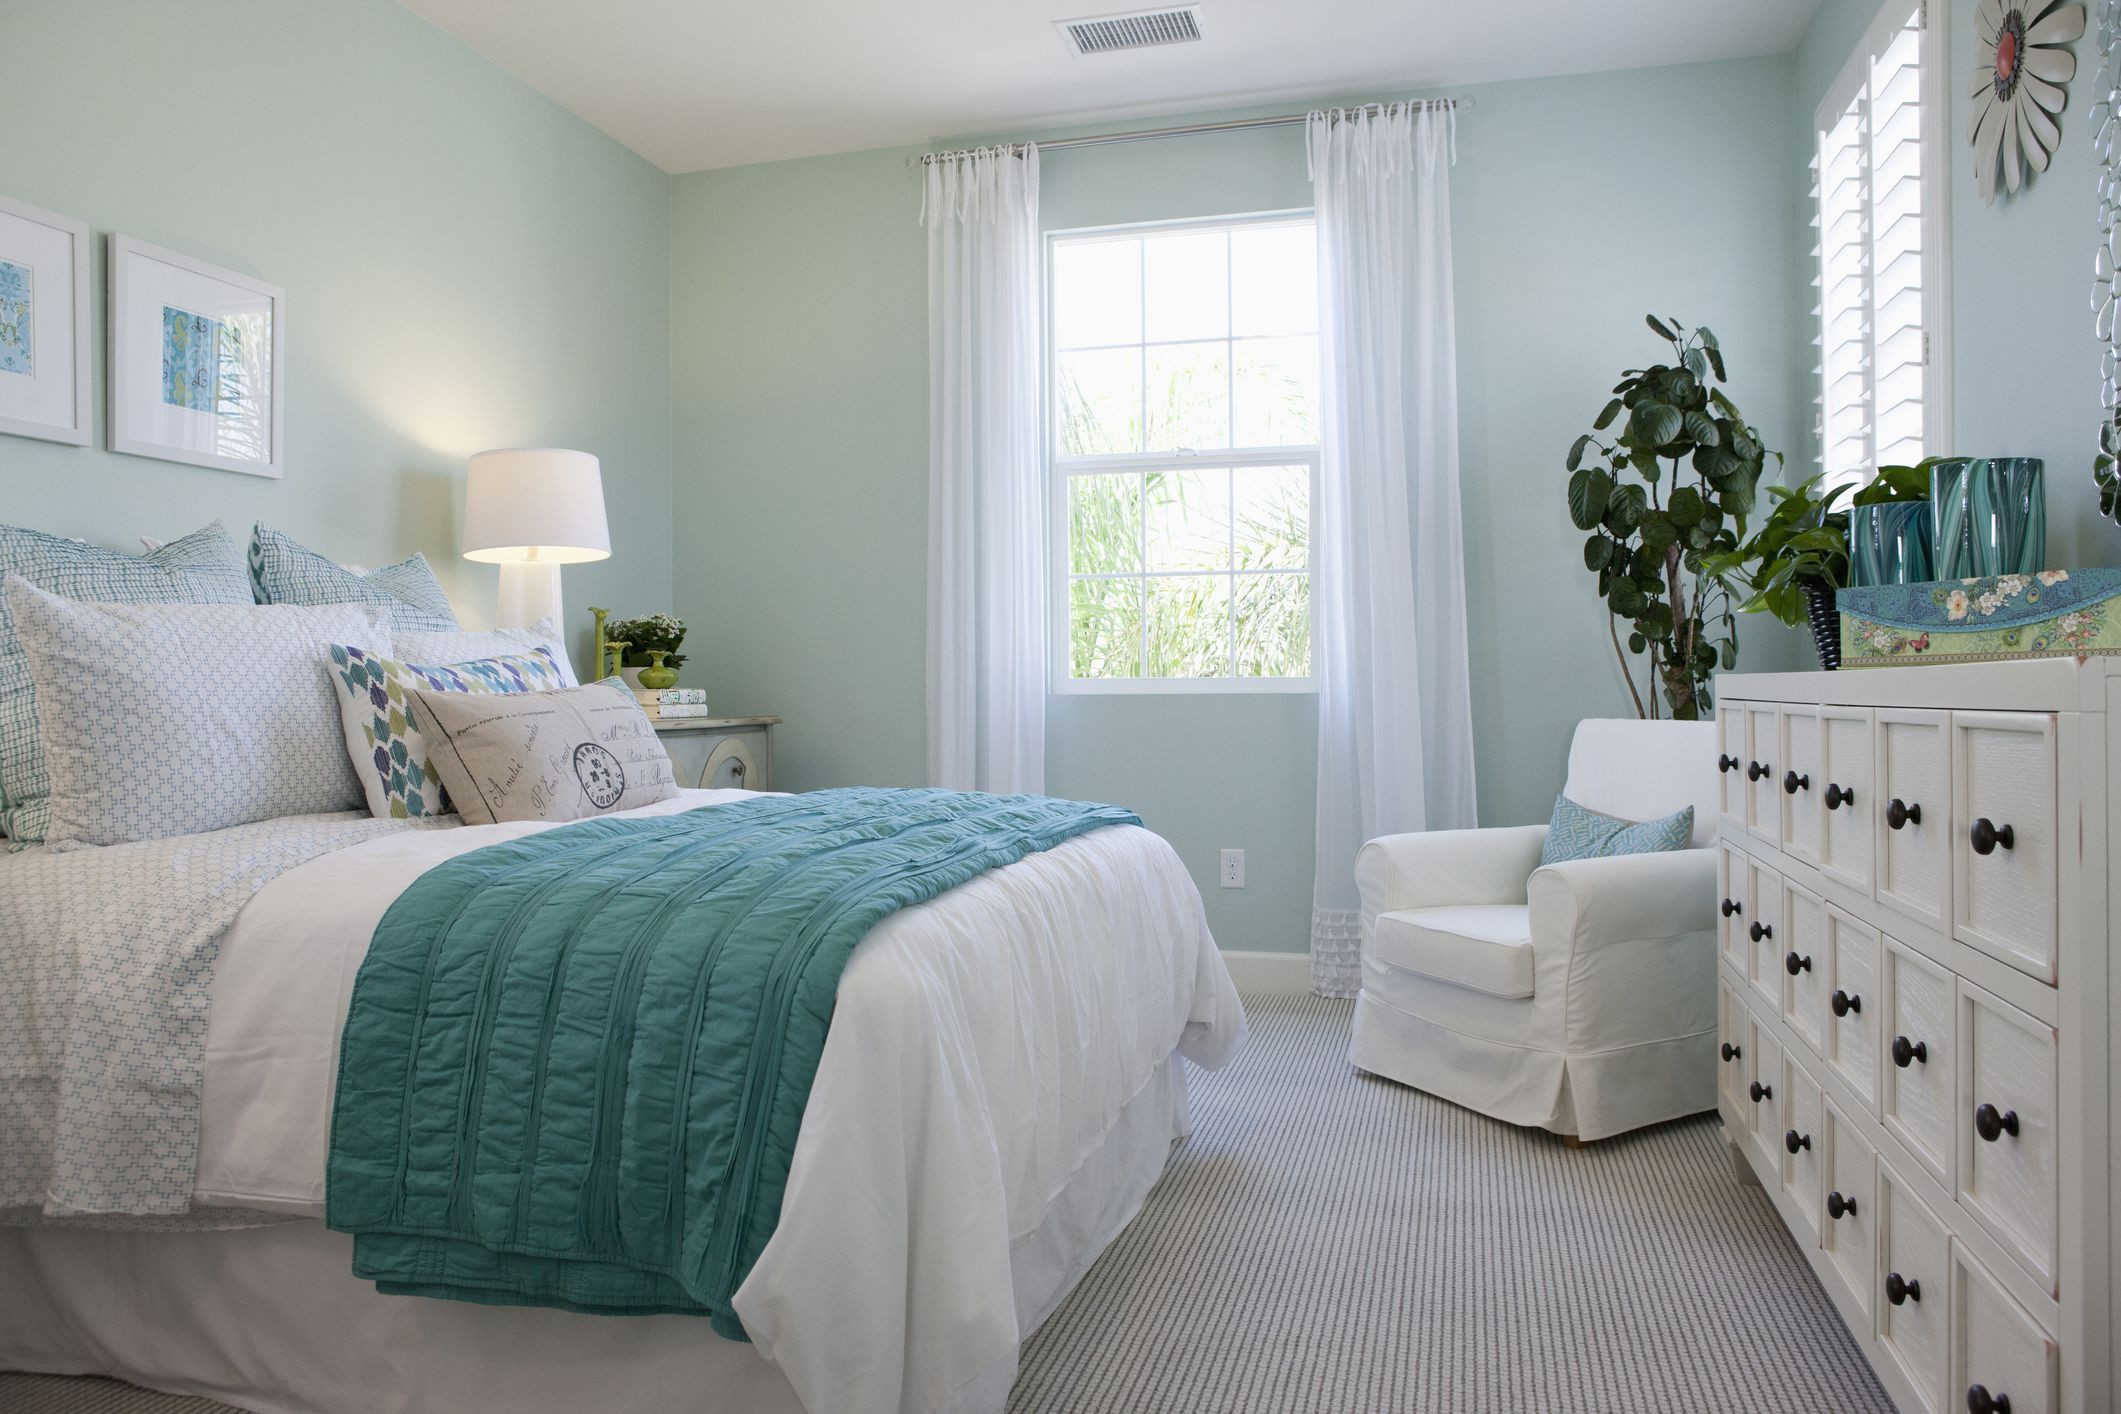 Bedroom Paint Colors Ideas
 How to Choose the Right Paint Colors for Your Bedroom